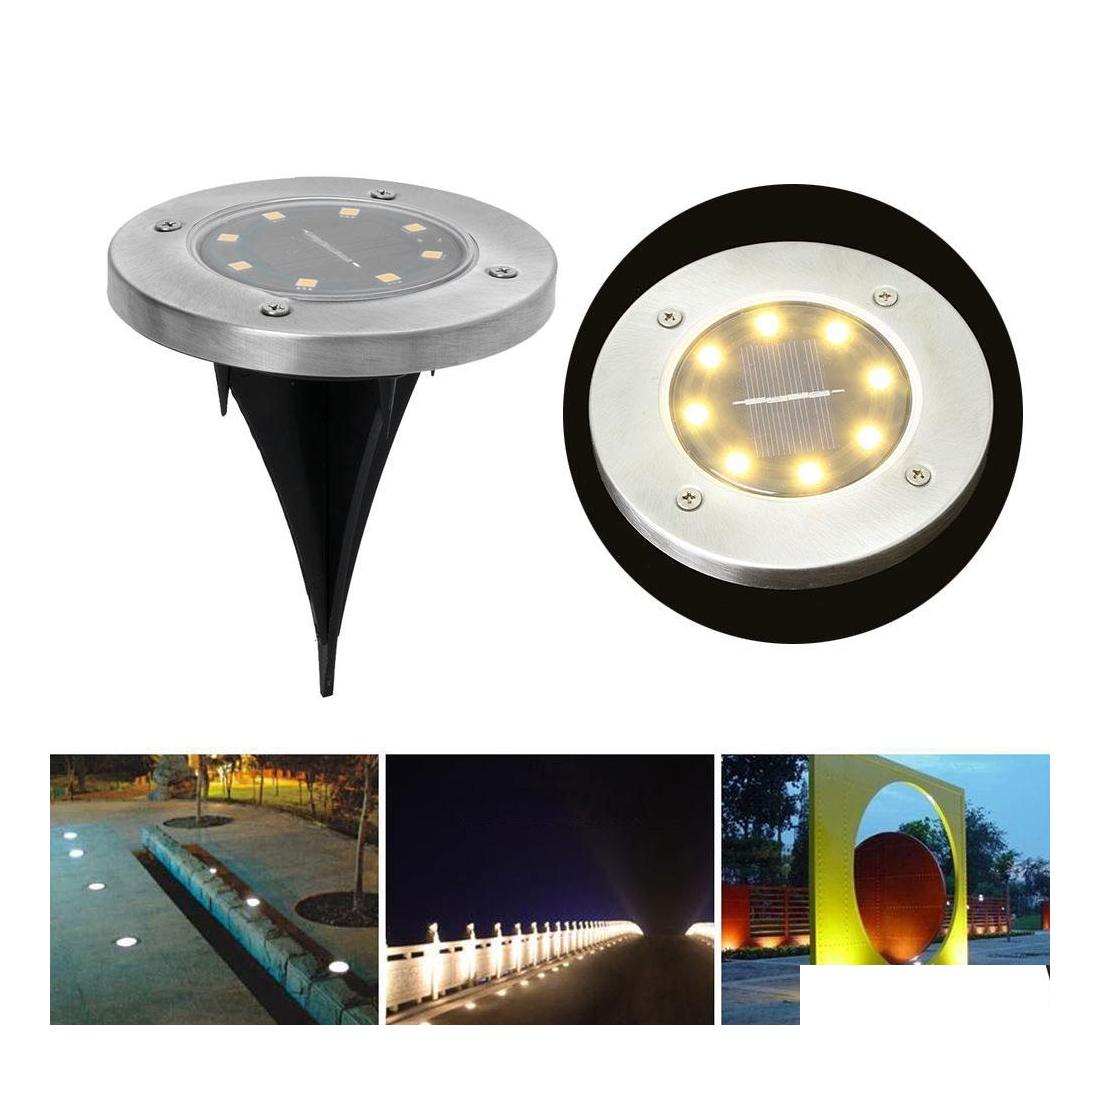 Underground Lamps Light 8 Led Solar Power Buried Under Ground Lamp Outdoor Path Way Garden Lawn Yard Lighting Drop Delivery Lights Dhjiy